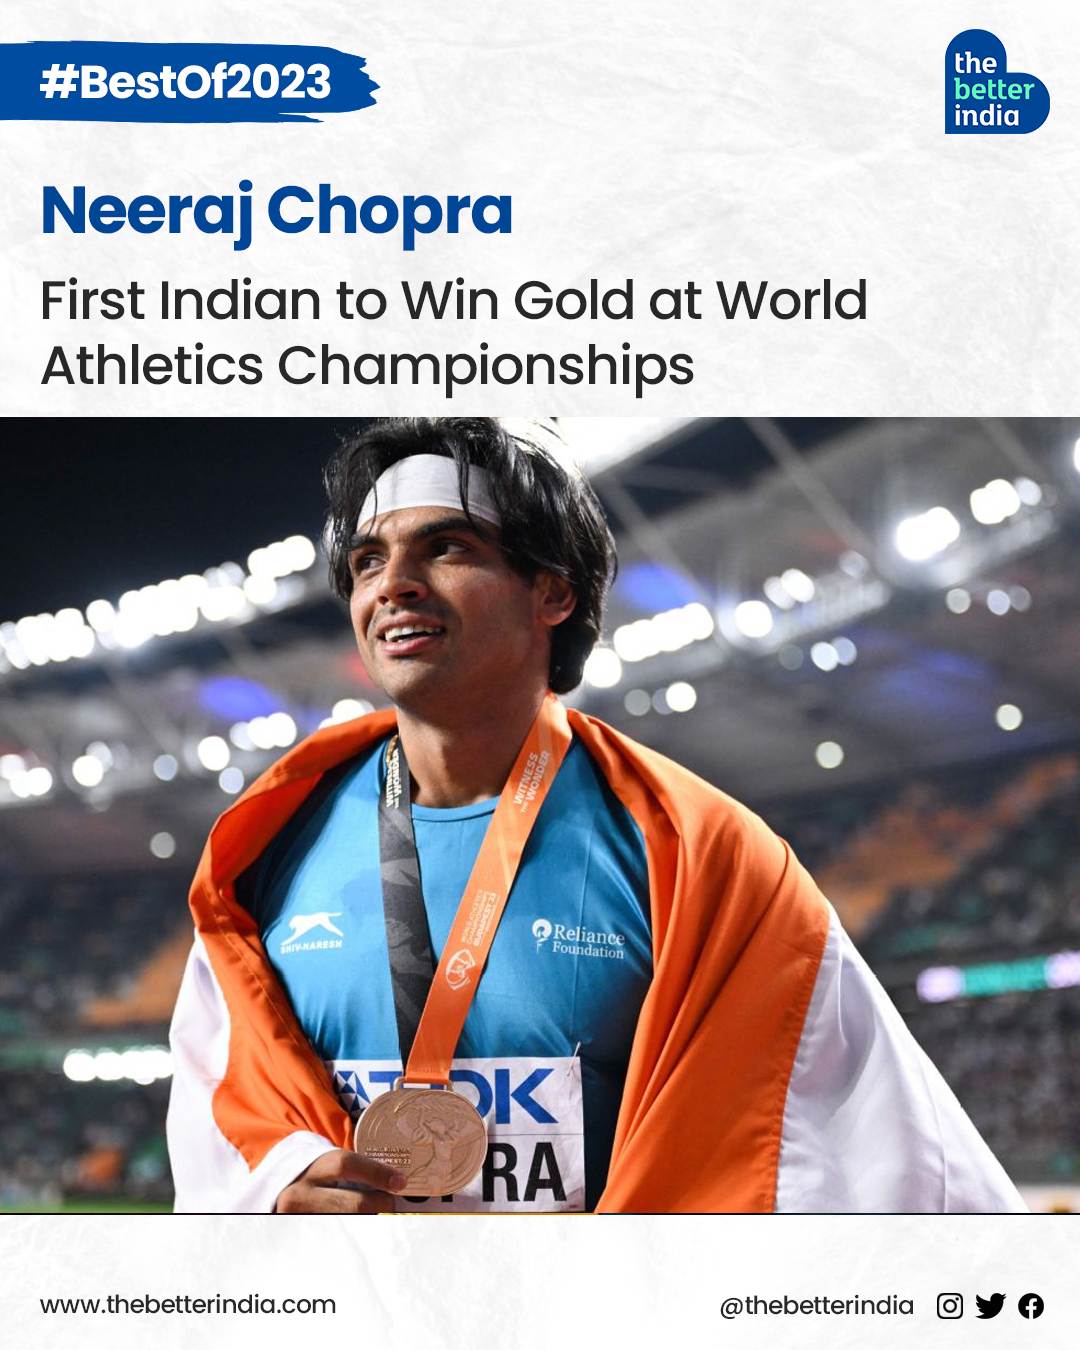 Neeraj Chopra is famous for his success at the Tokyo 2020 Olympics and the World Athletics Championships